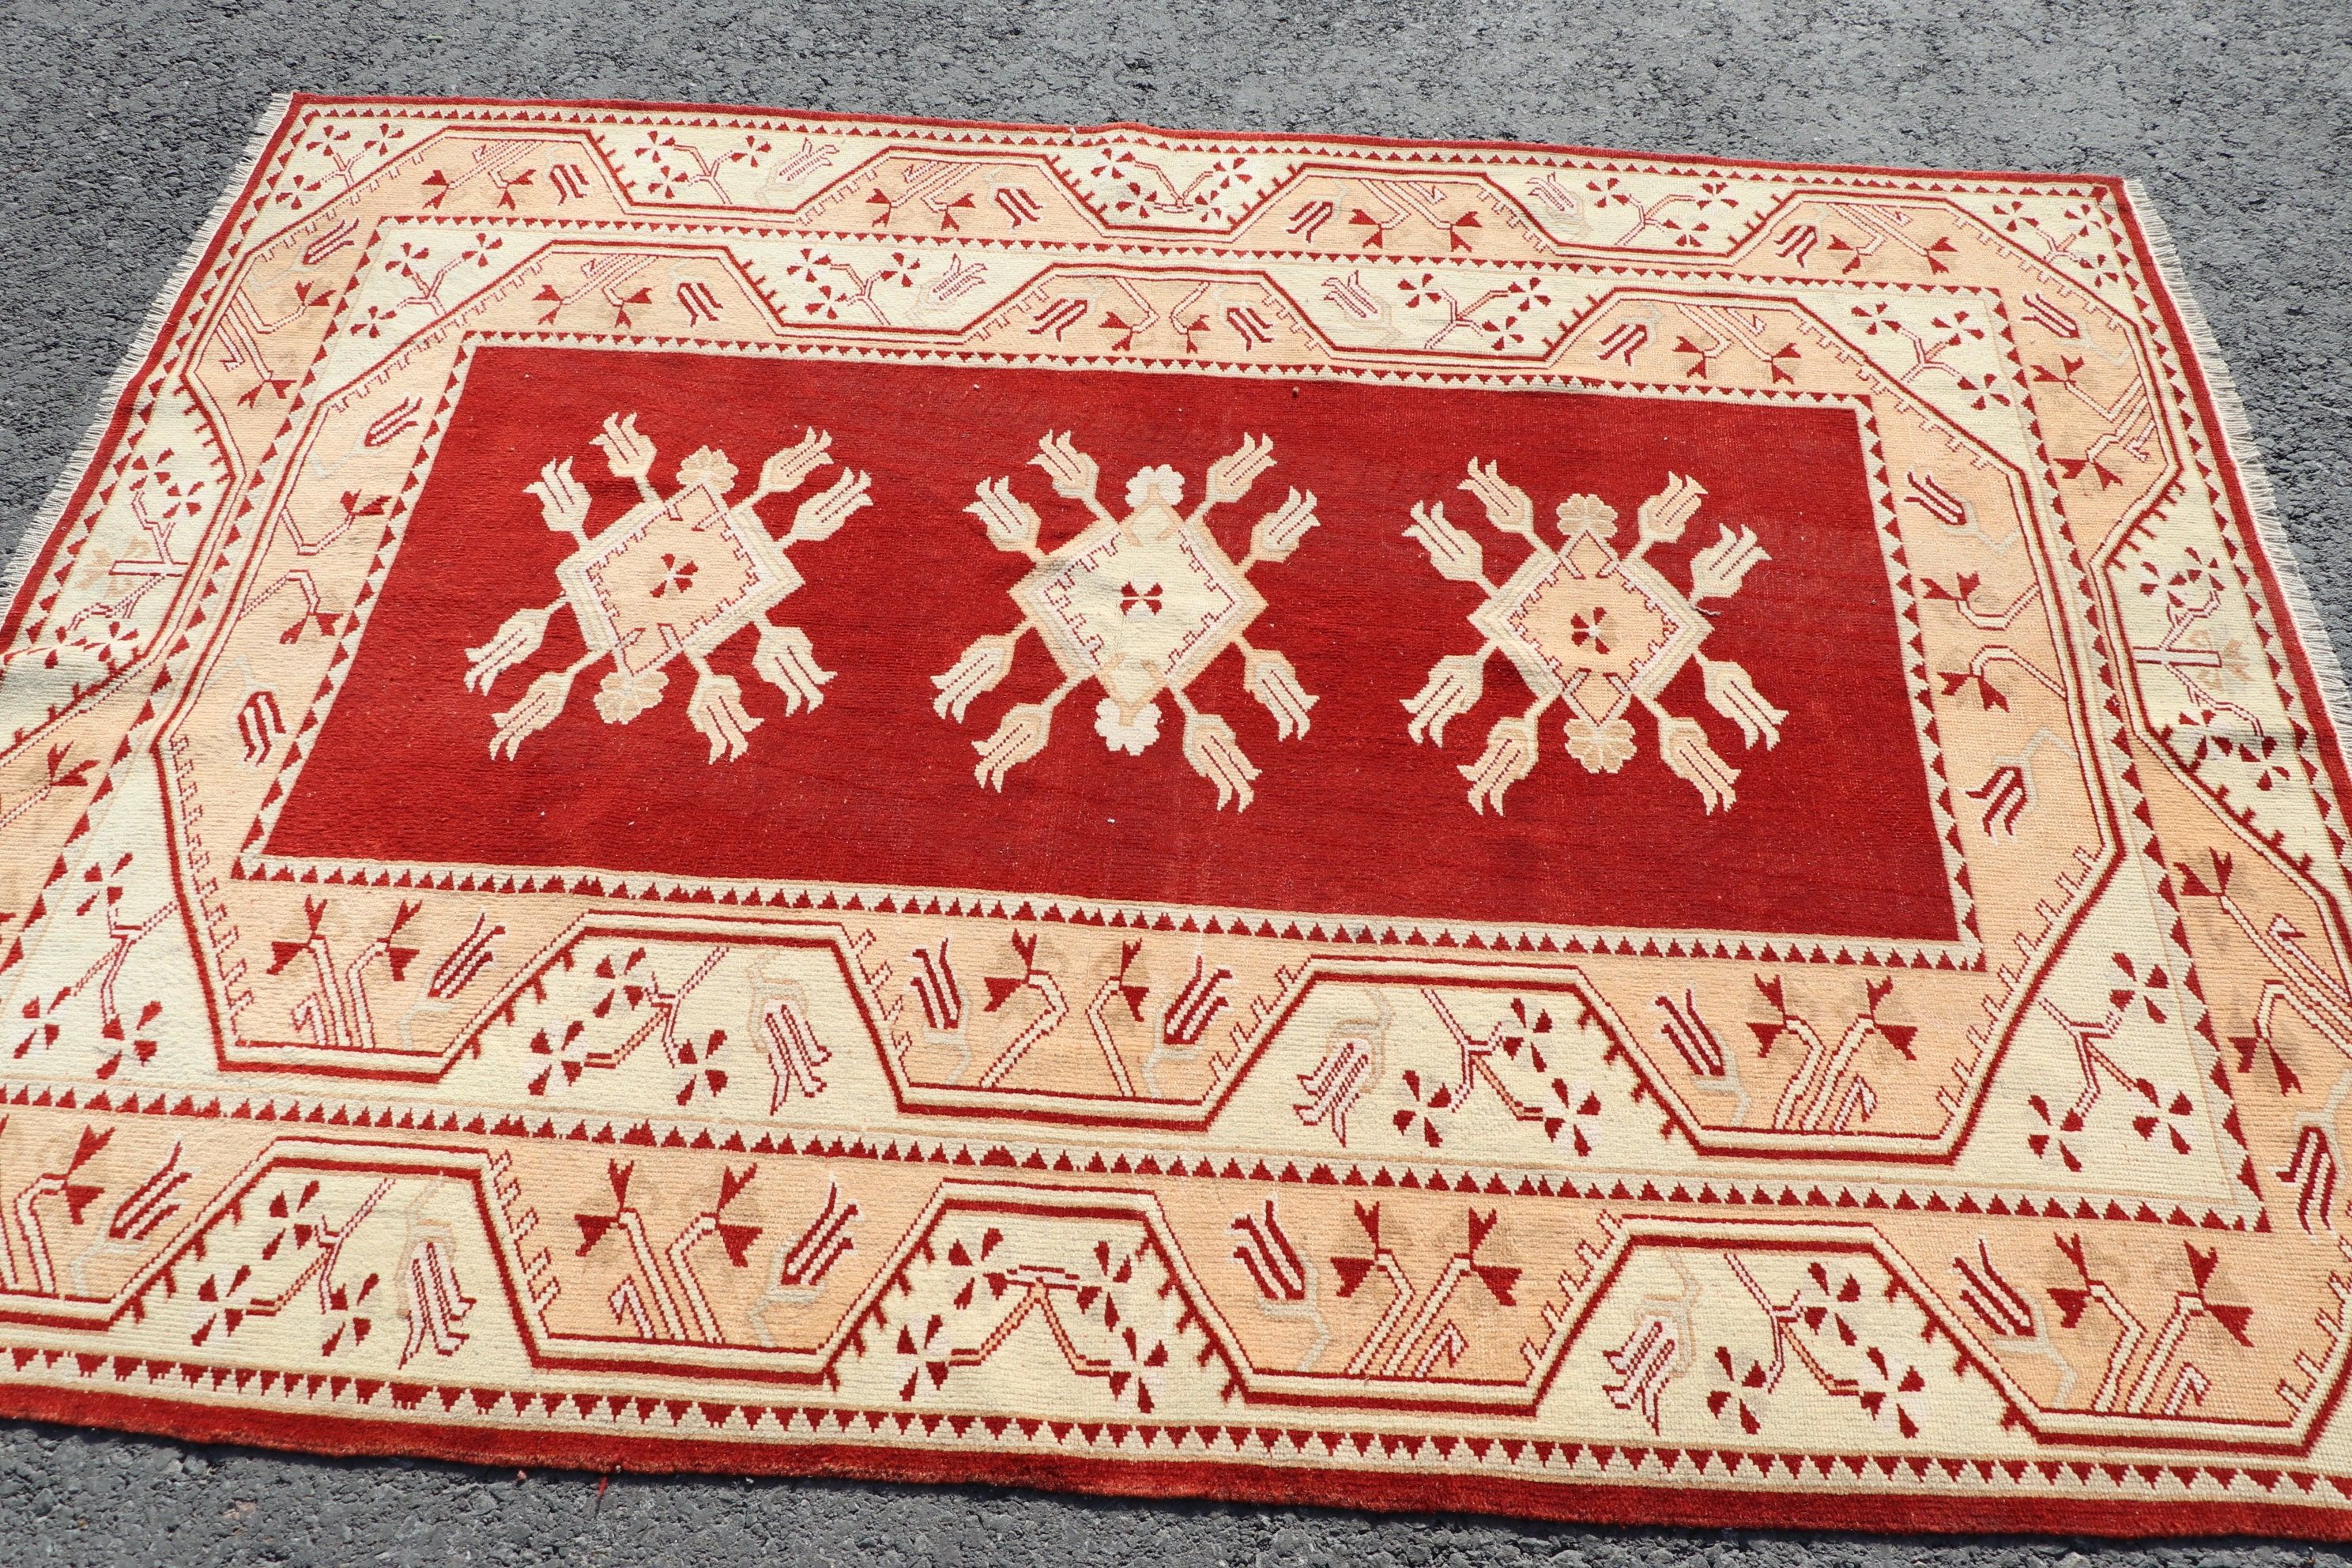 4.9x6.7 ft Area Rugs, Cool Rug, Rugs for Bedroom, Home Decor Rug, Pale Rug, Vintage Rug, Turkish Rugs, Vintage Decor Rug, Red Bedroom Rug